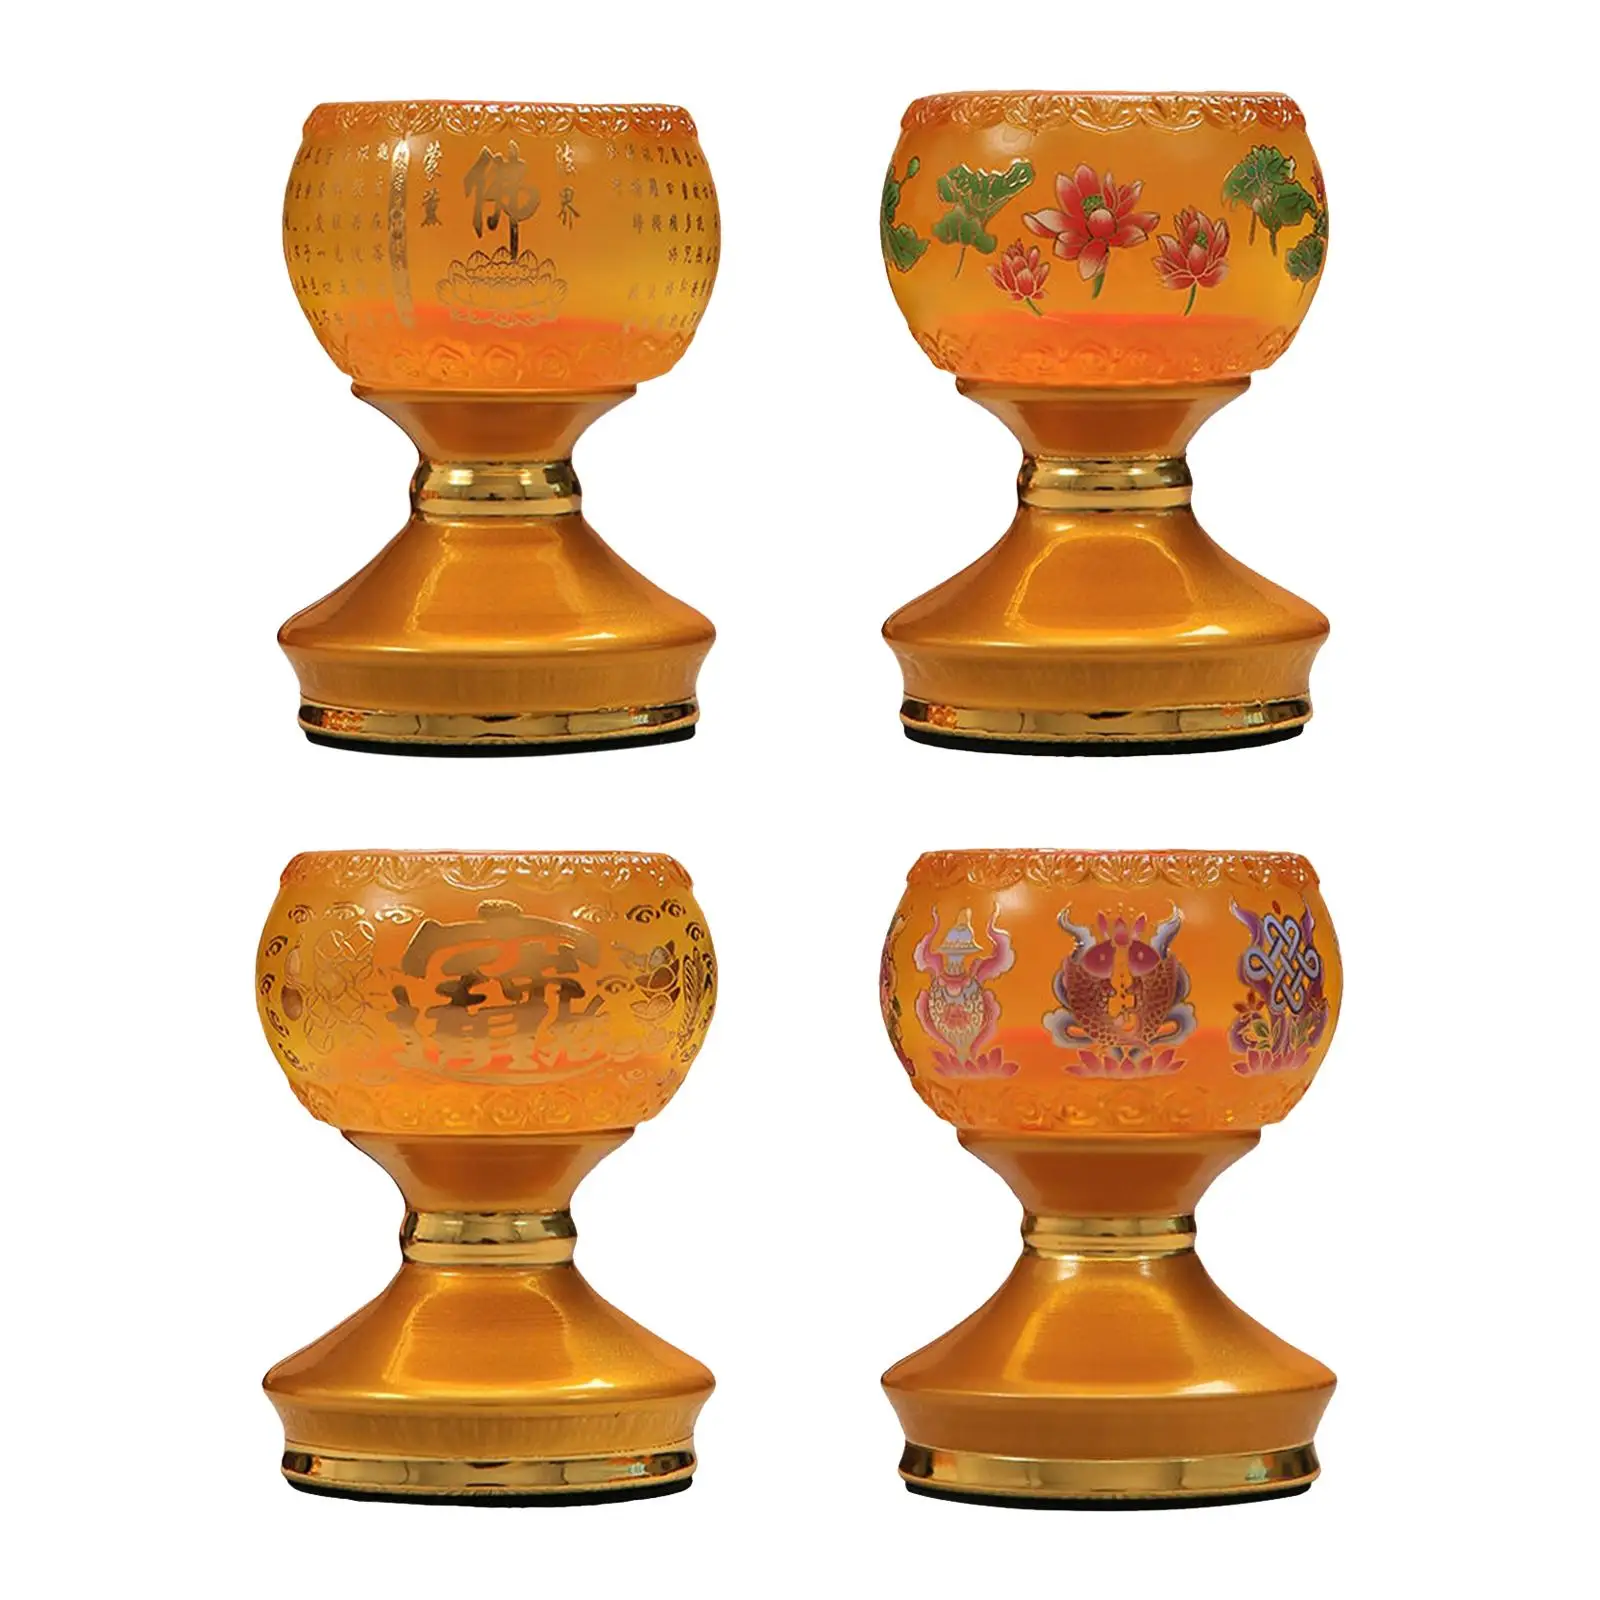 Ghee Lamp Holder Candle Holder Buddhist Altar Supplies Candlestick Butter Lamp Holder for Table Centerpiece Bedroom Home Decor